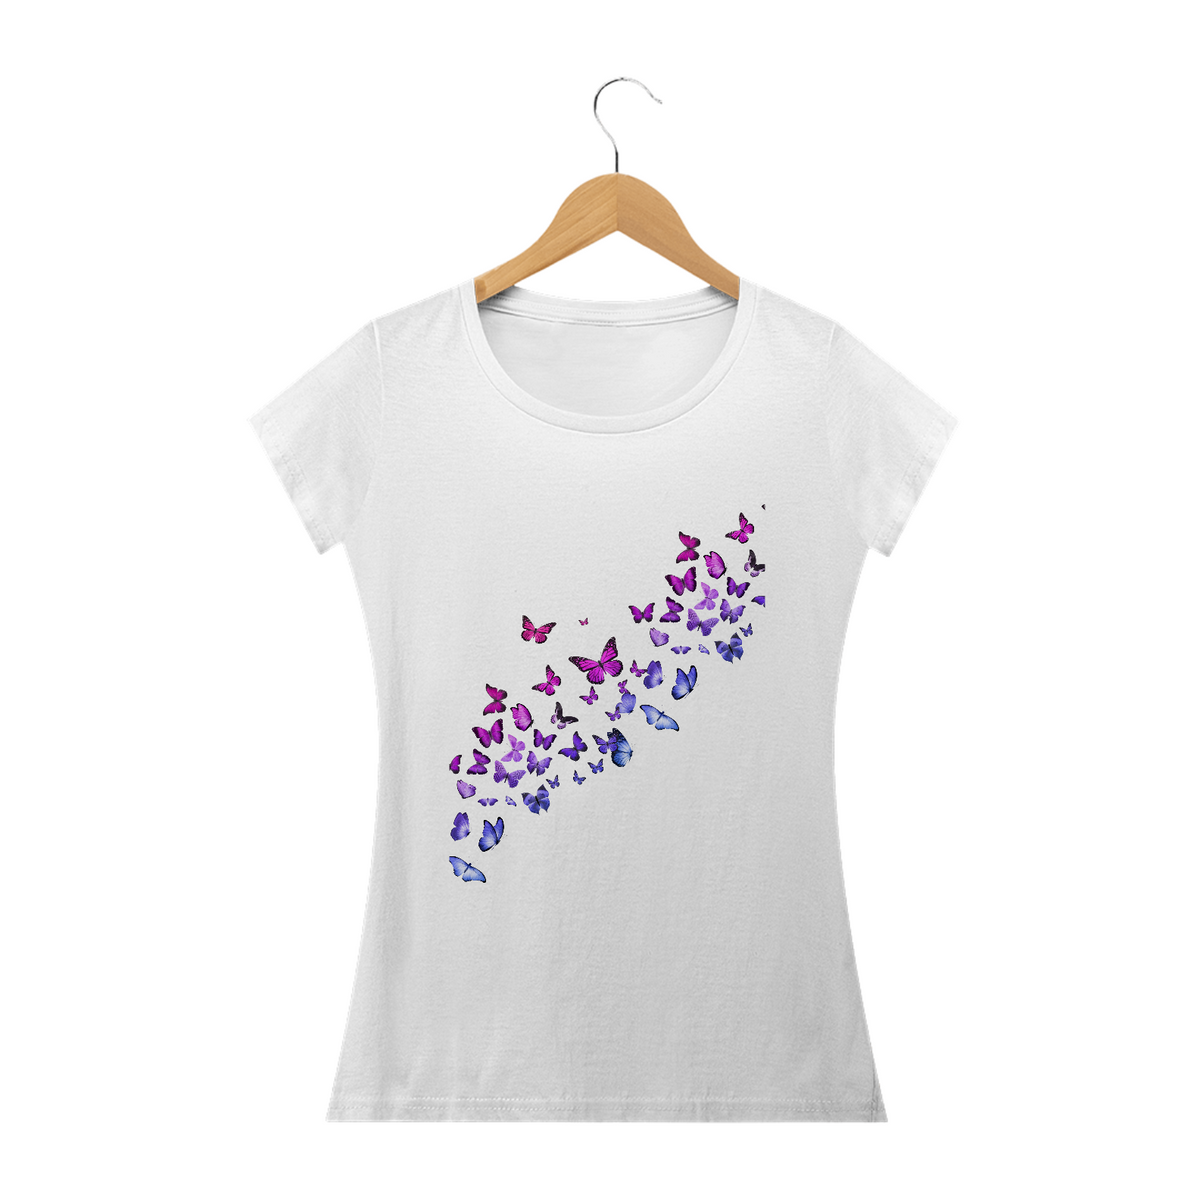 Nome do produto: T-Shirts Classic - Butterfly